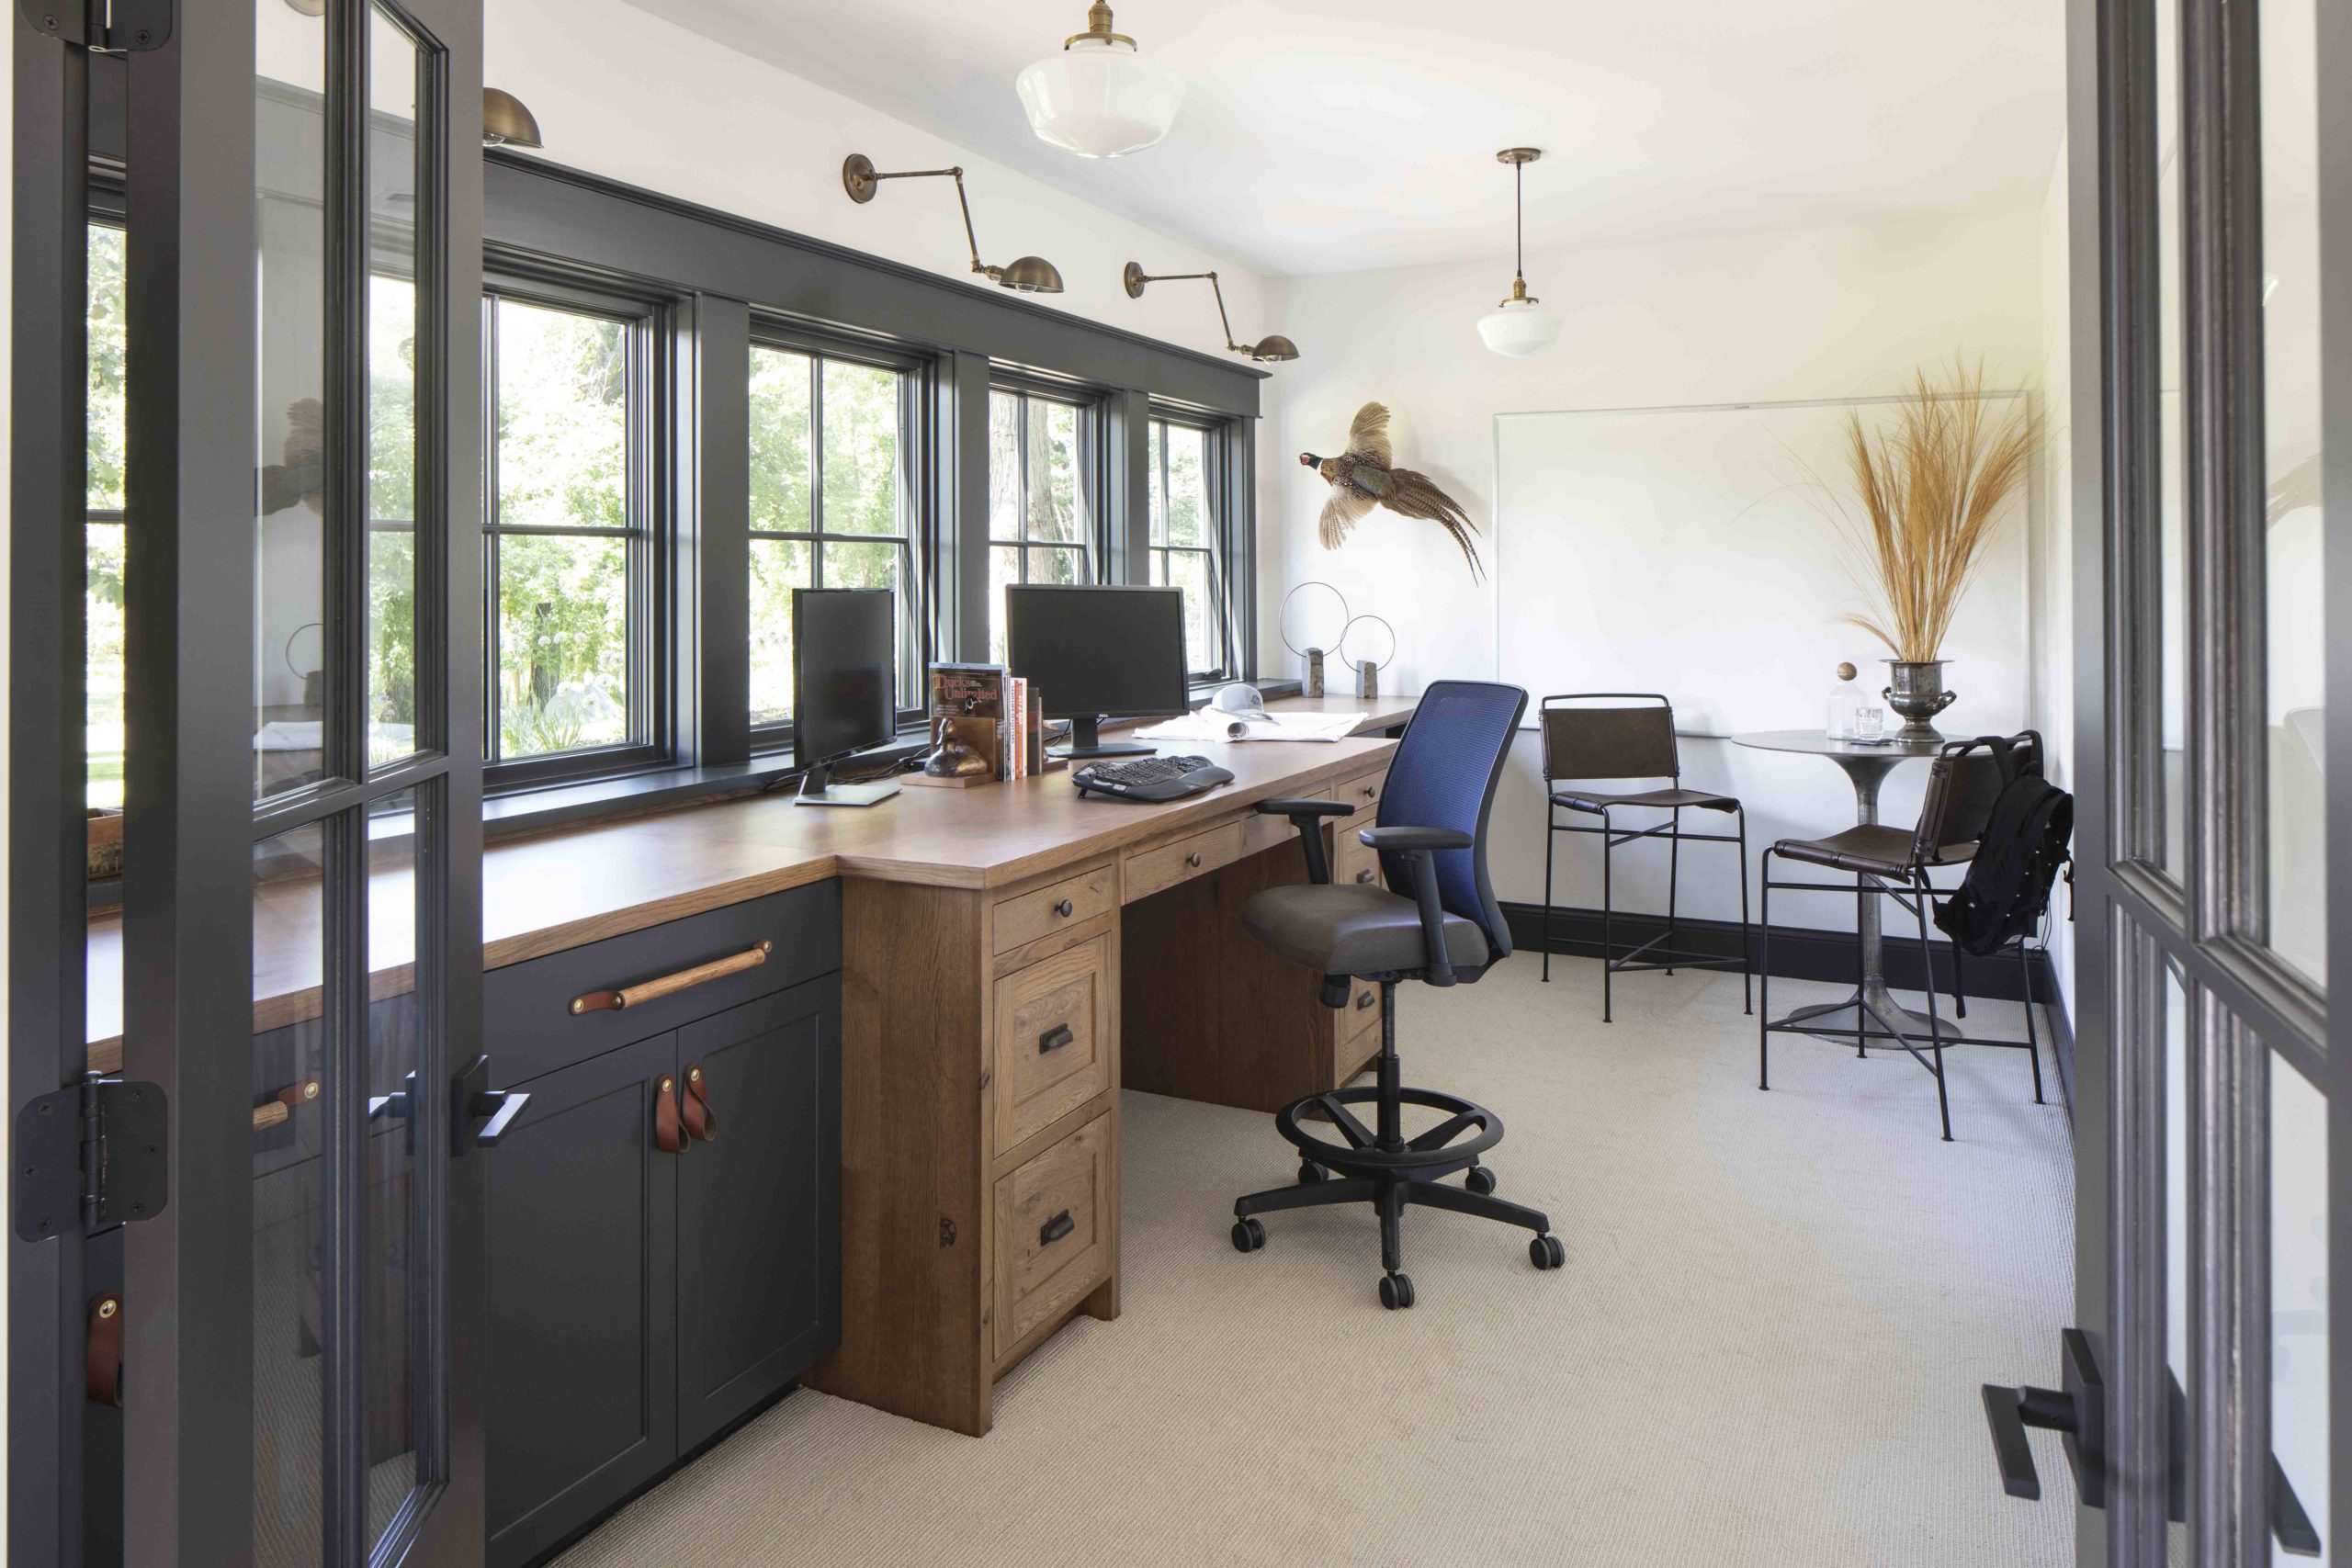 A prairie transitional home office with a desk and chairs.